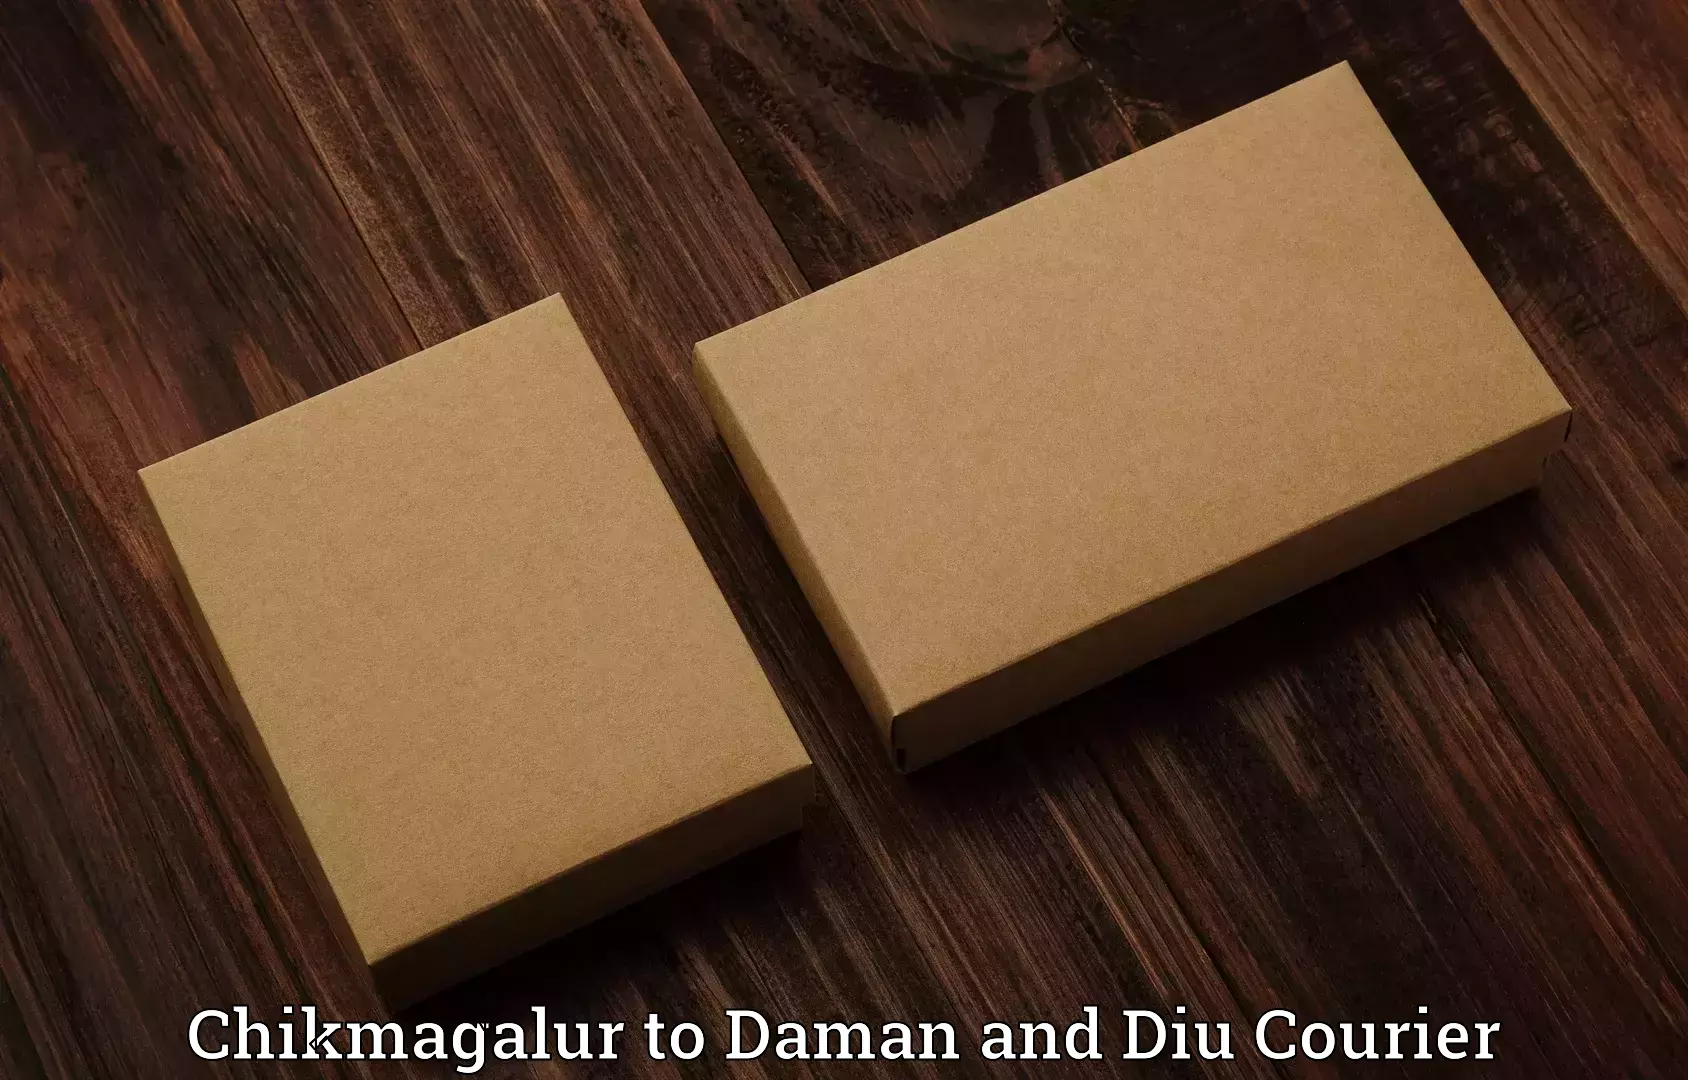 Luggage shipment tracking Chikmagalur to Daman and Diu